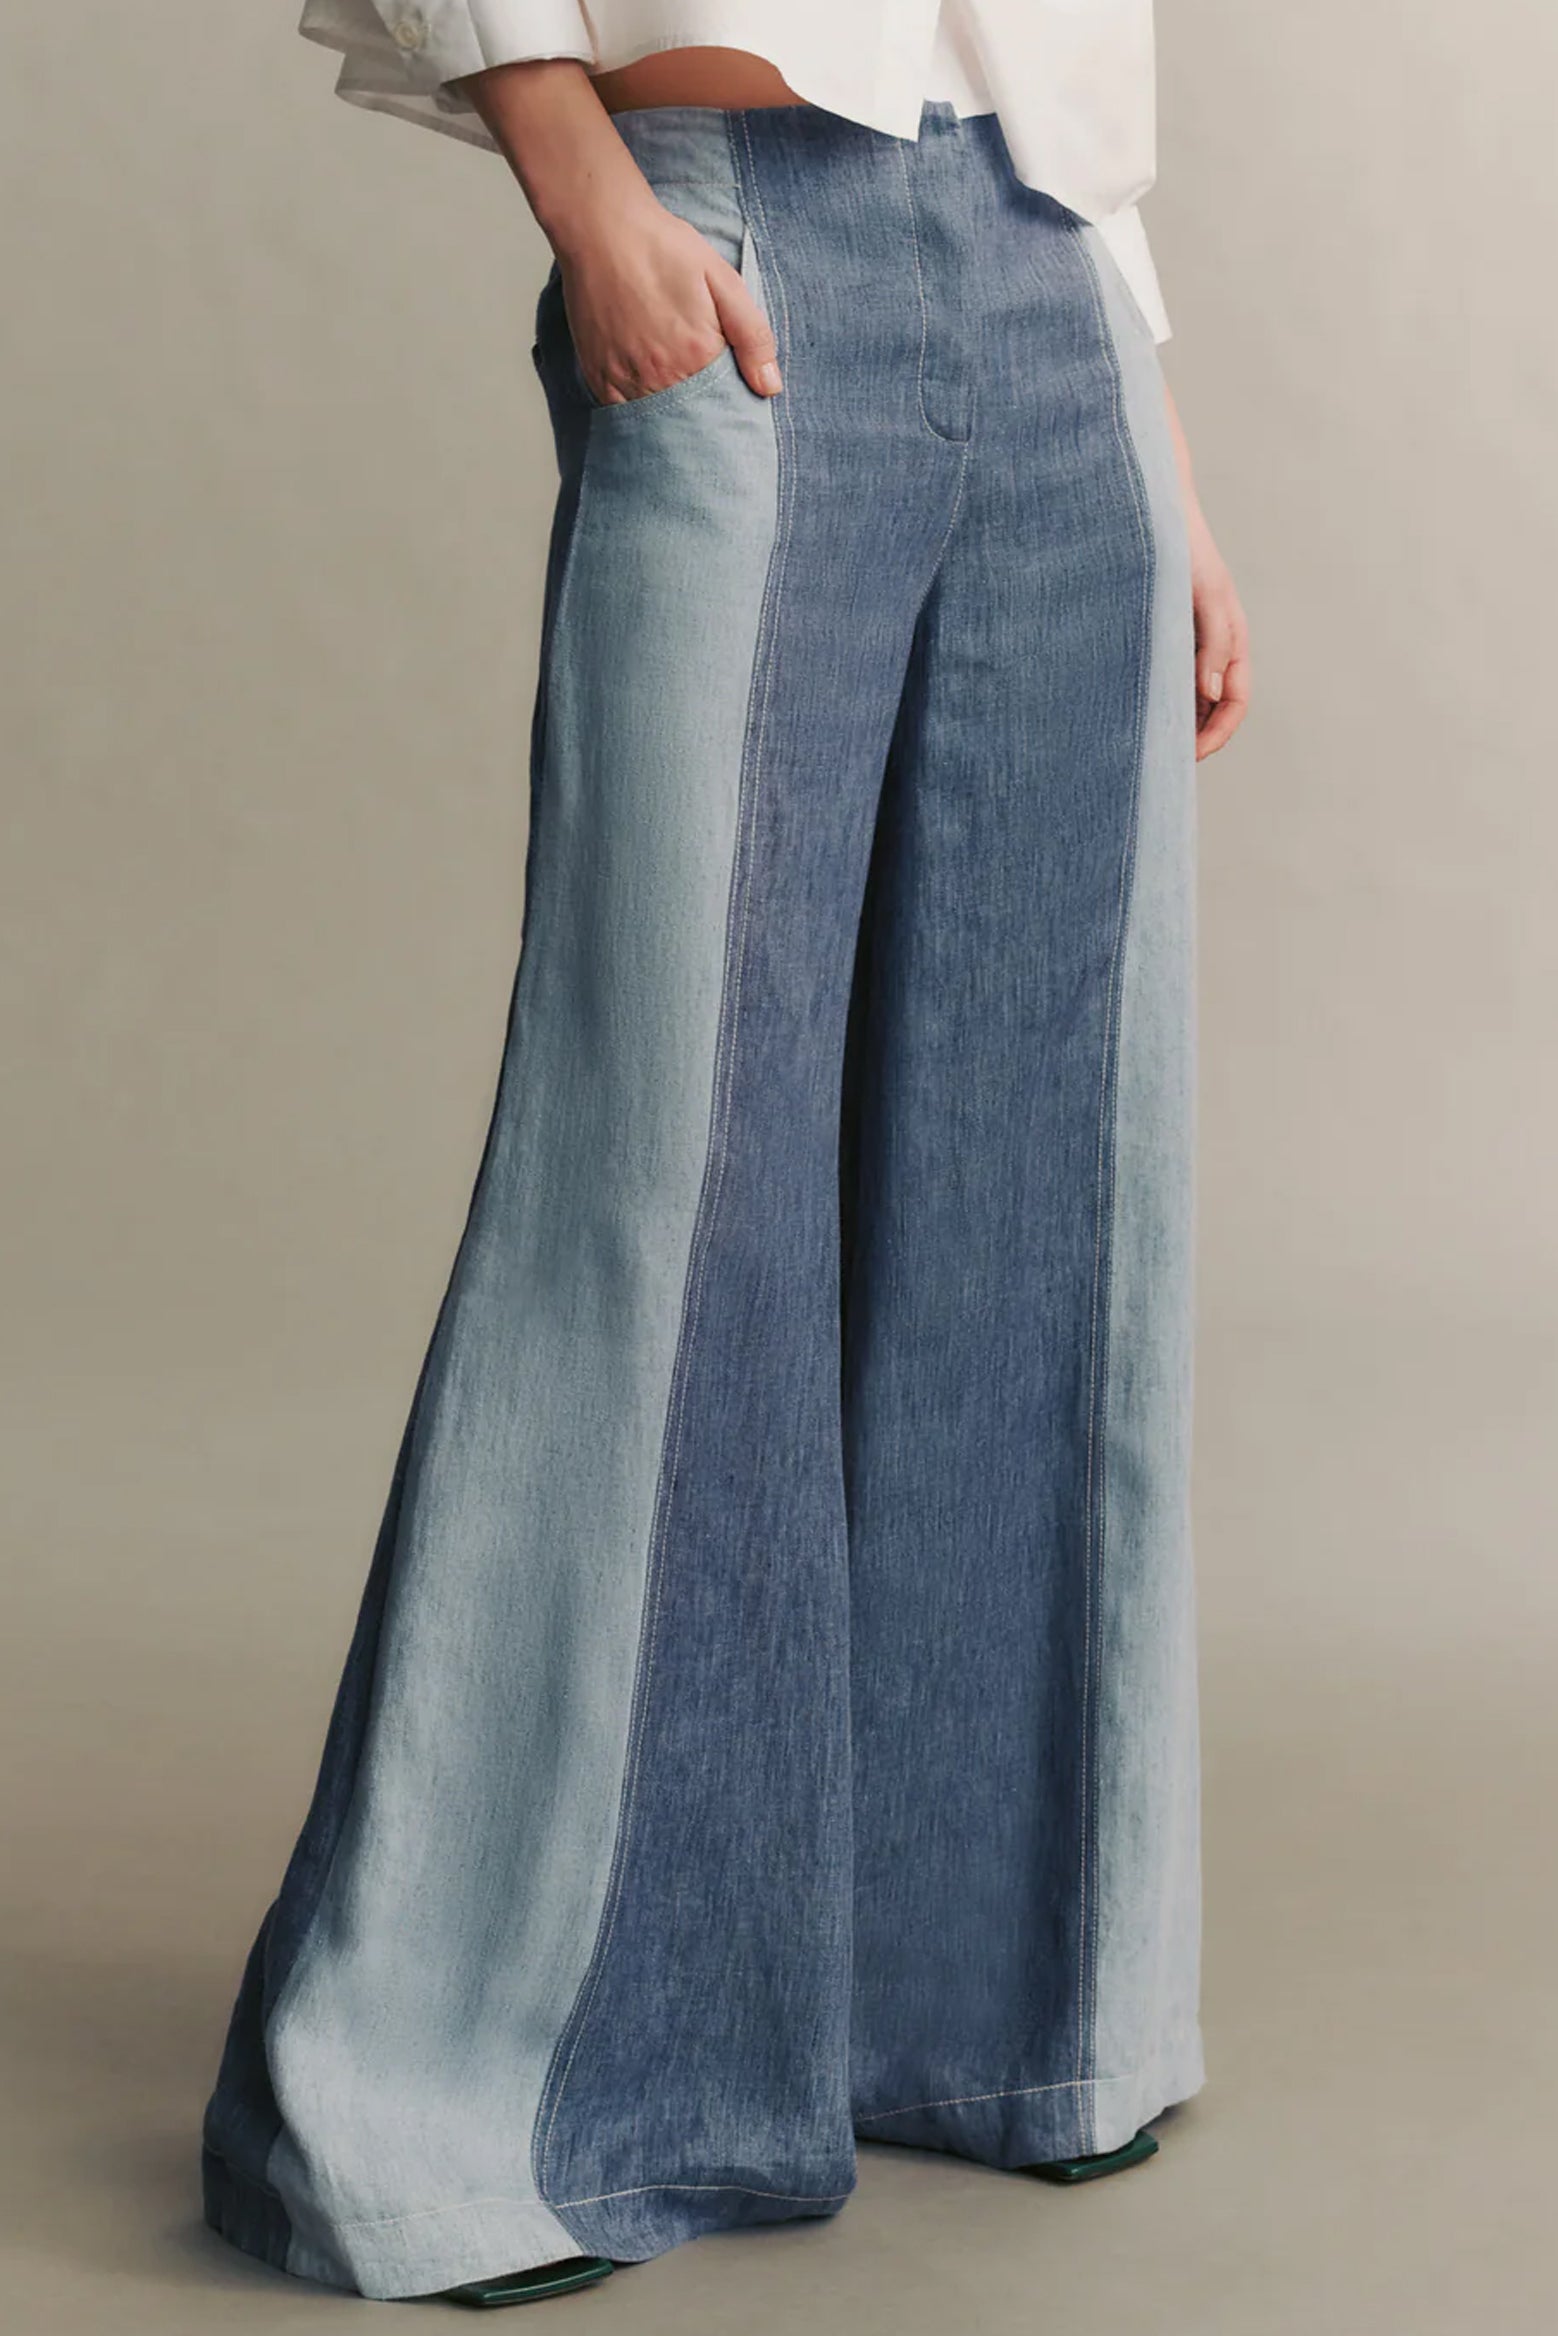 TWP Demie With Combo Pants in Medium Indigo available at The New Trend Australia.